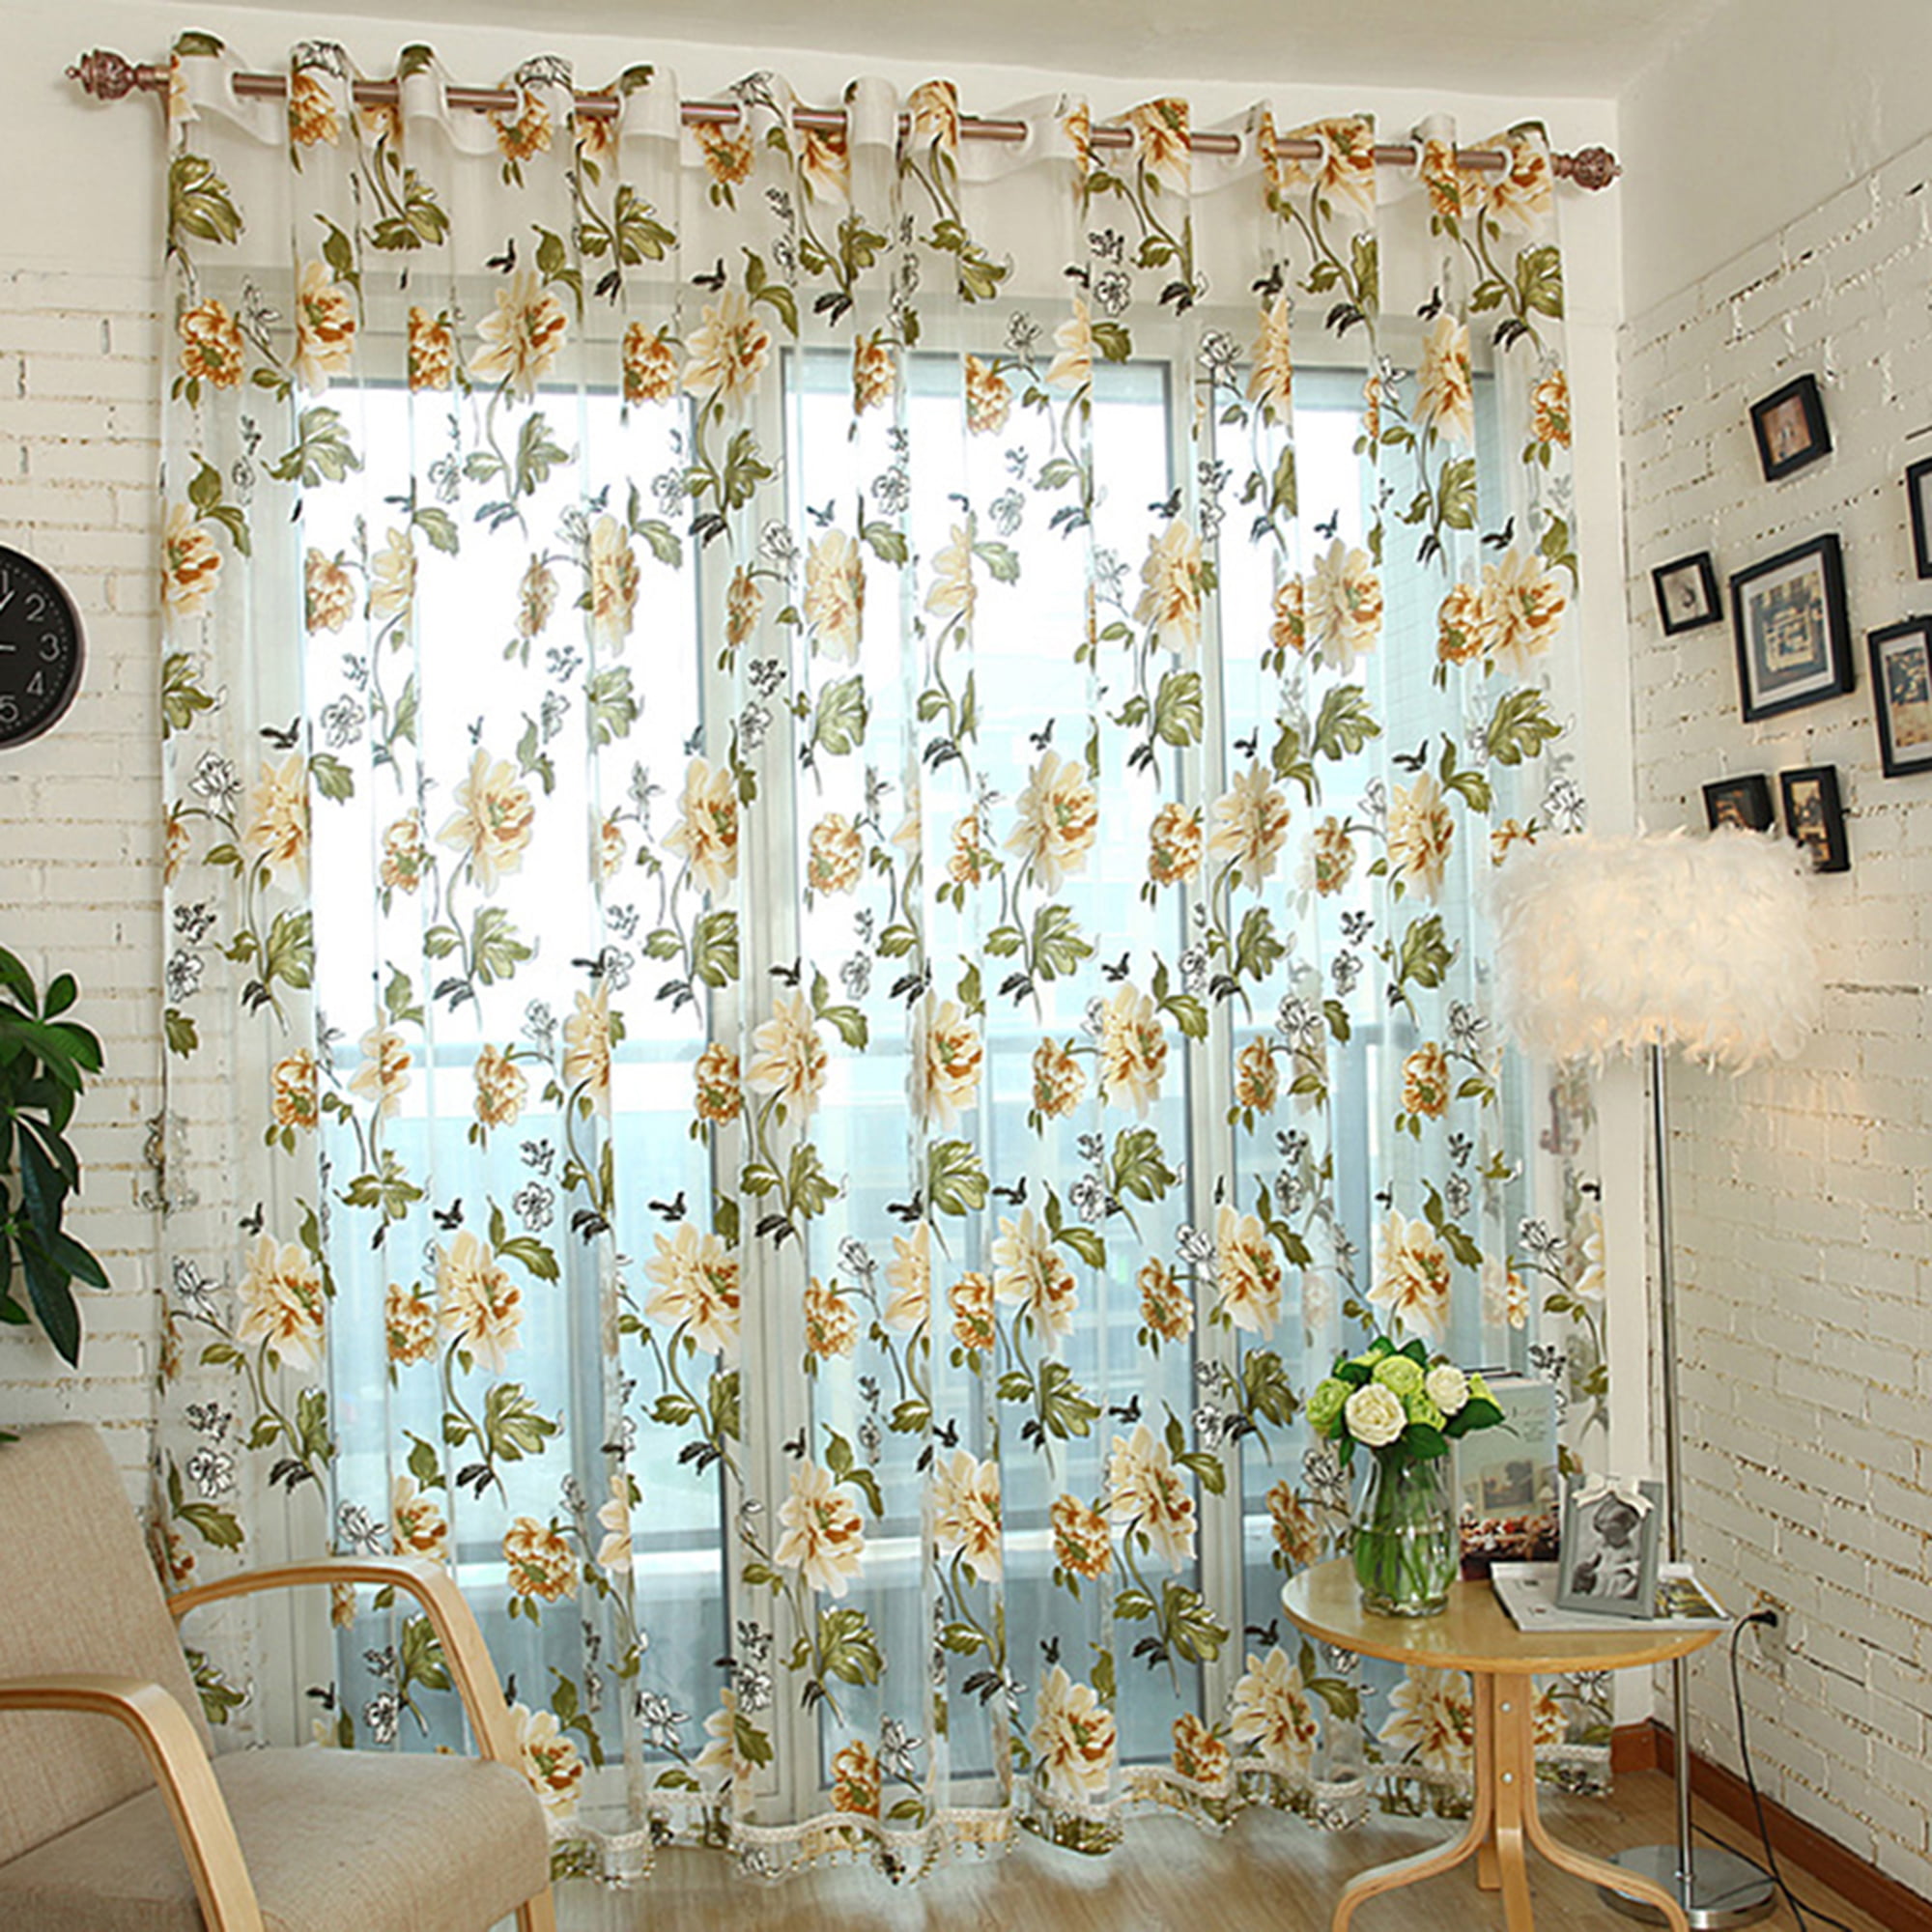 1/2 Home Floral Tulle Voile Door Window Curtain Drape Panel Sheer Scarf Valances 